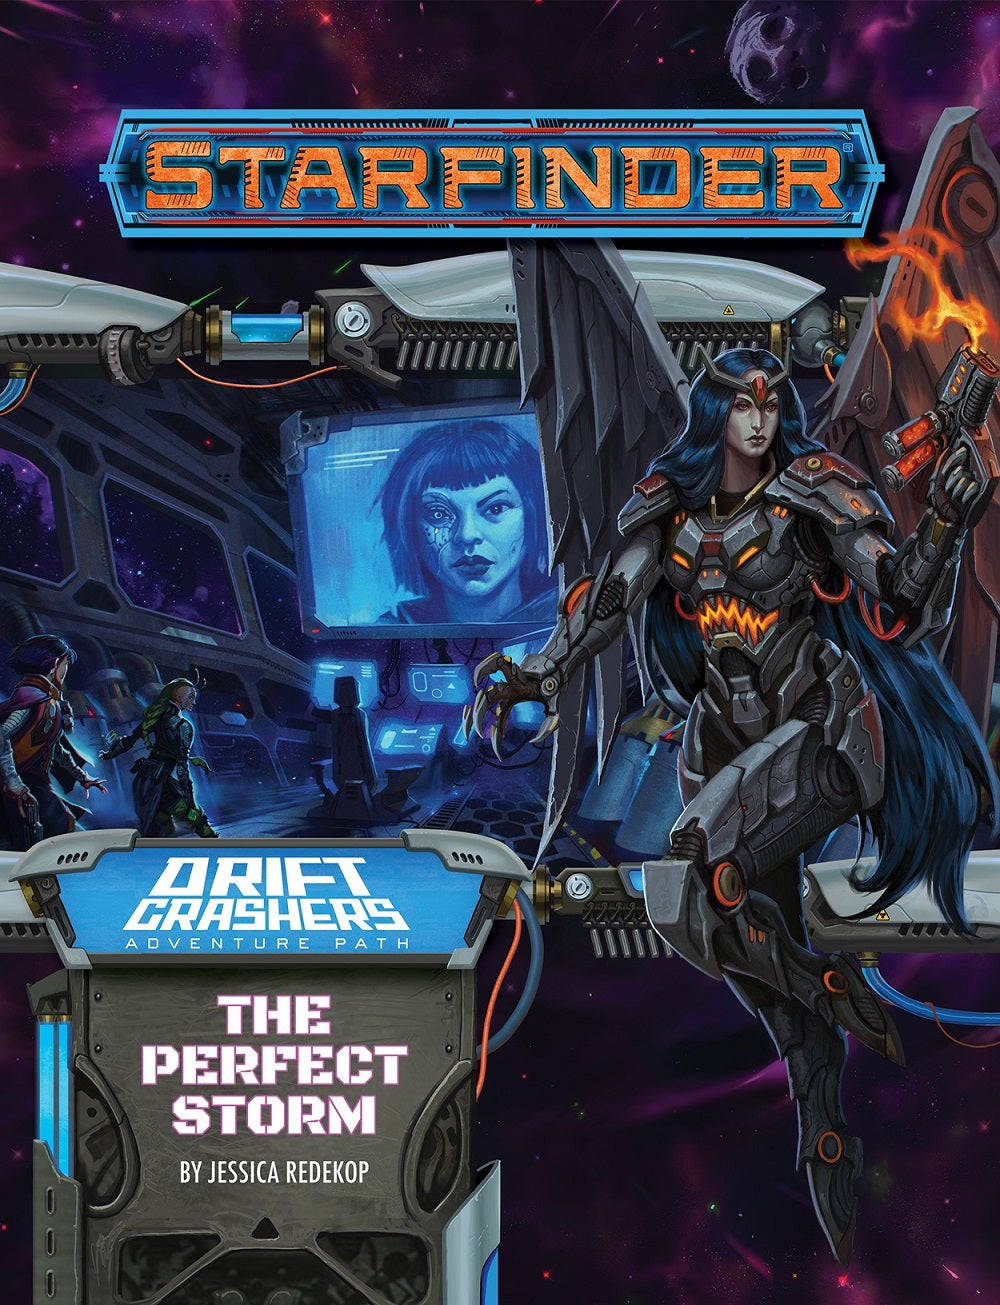 STARFINDER 46 DRIFT CRASHERS 1: THE PERFECT STORM | BD Cosmos